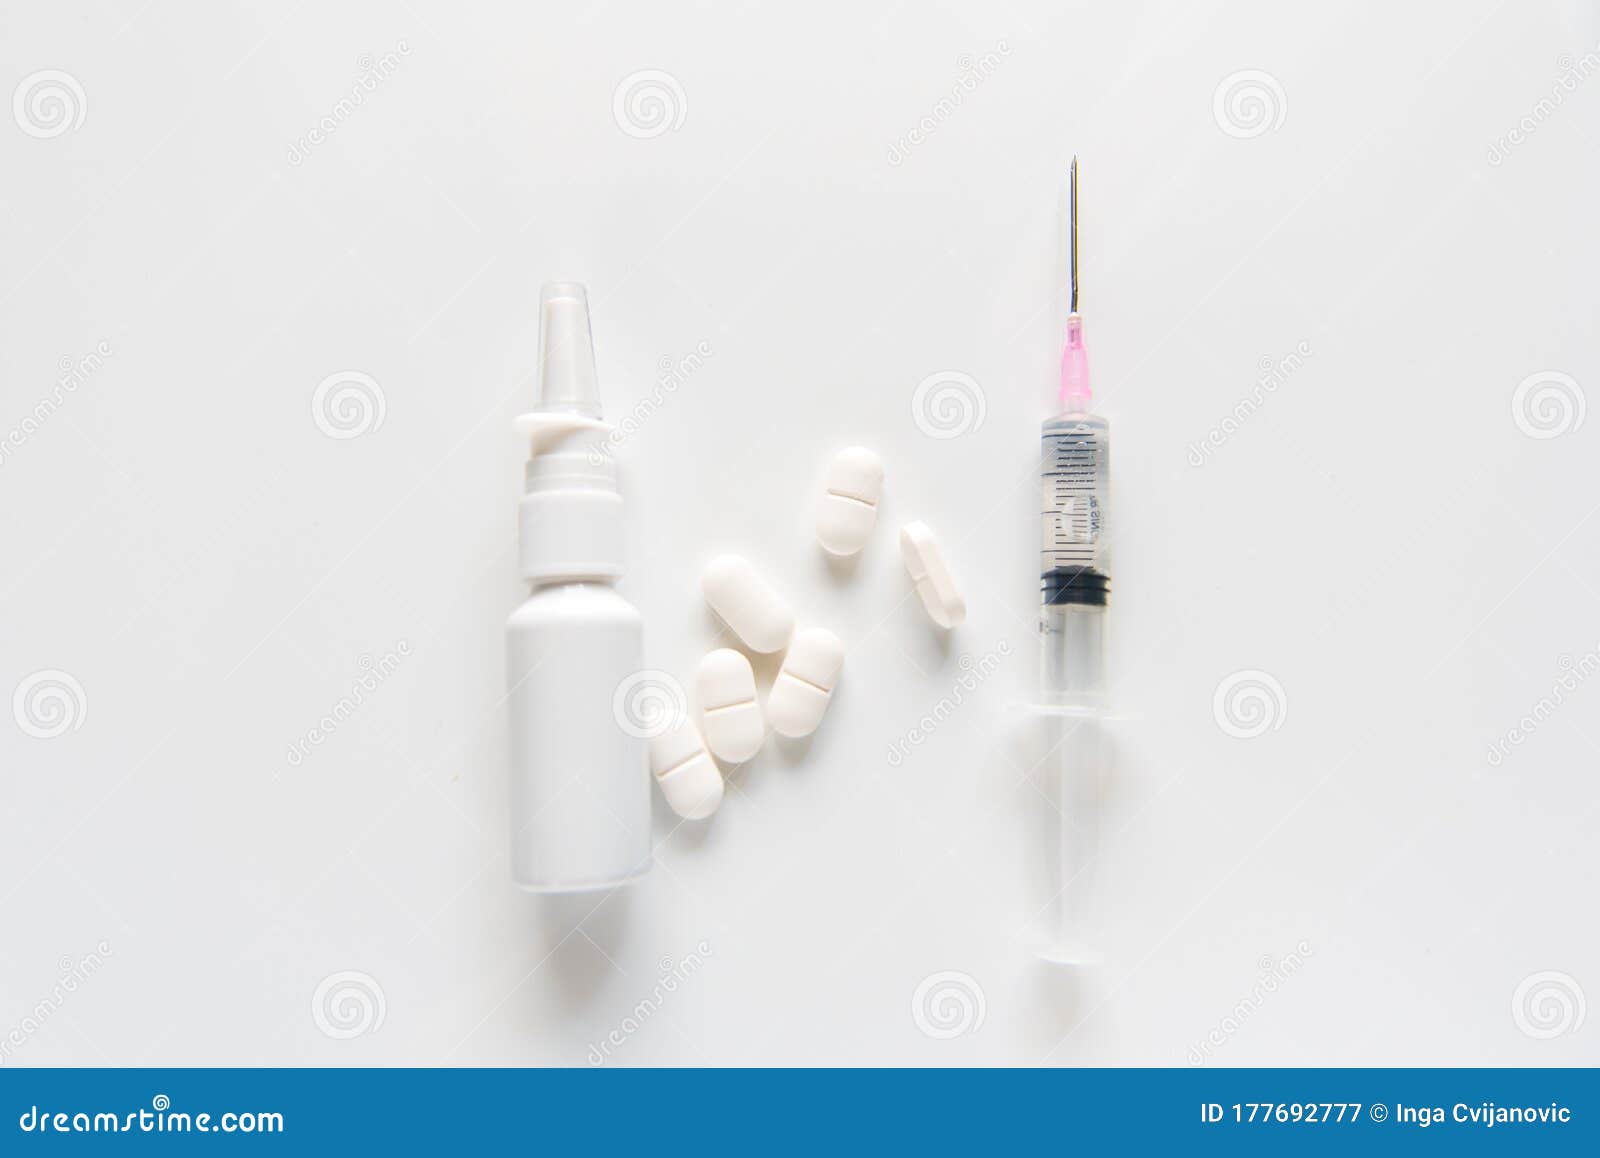 pray, pills, drops and syringe on white background .